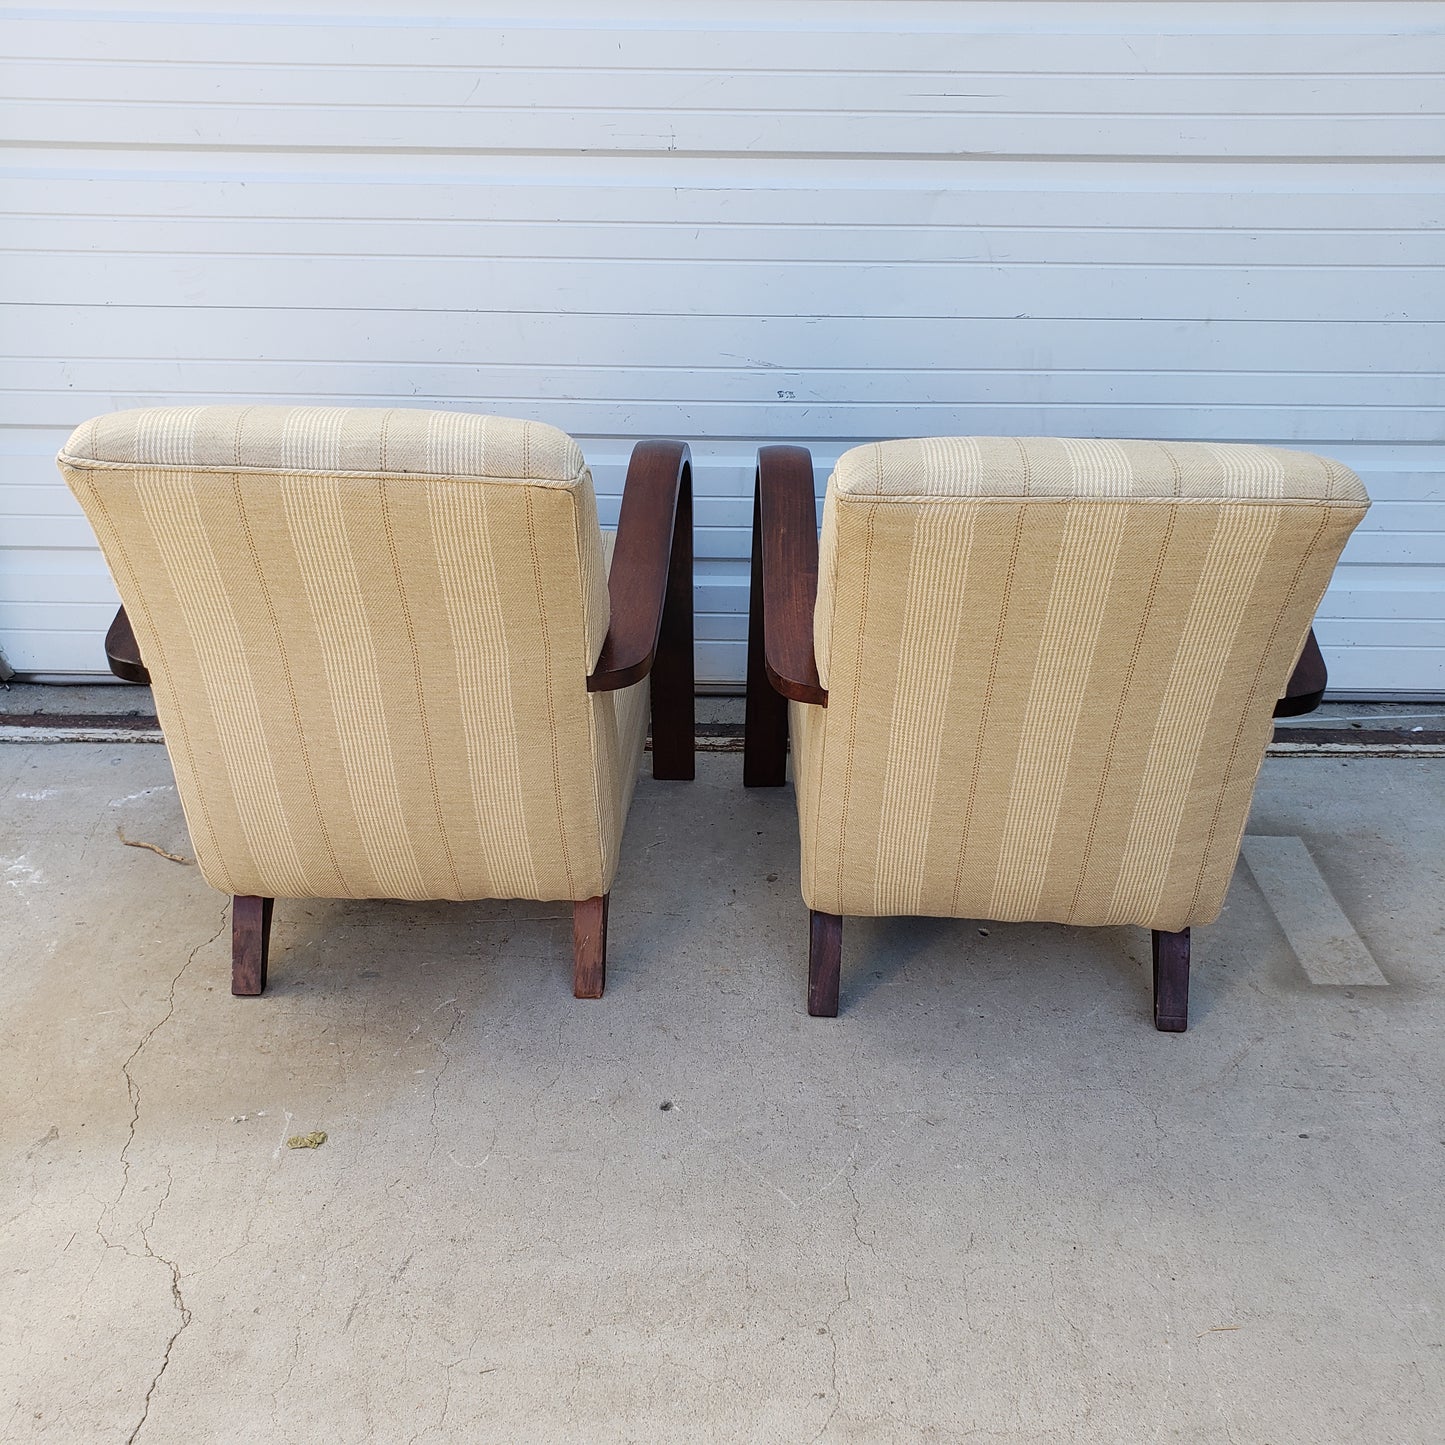 Pair of French Mid Century Upholstered Chairs with Wood Arms